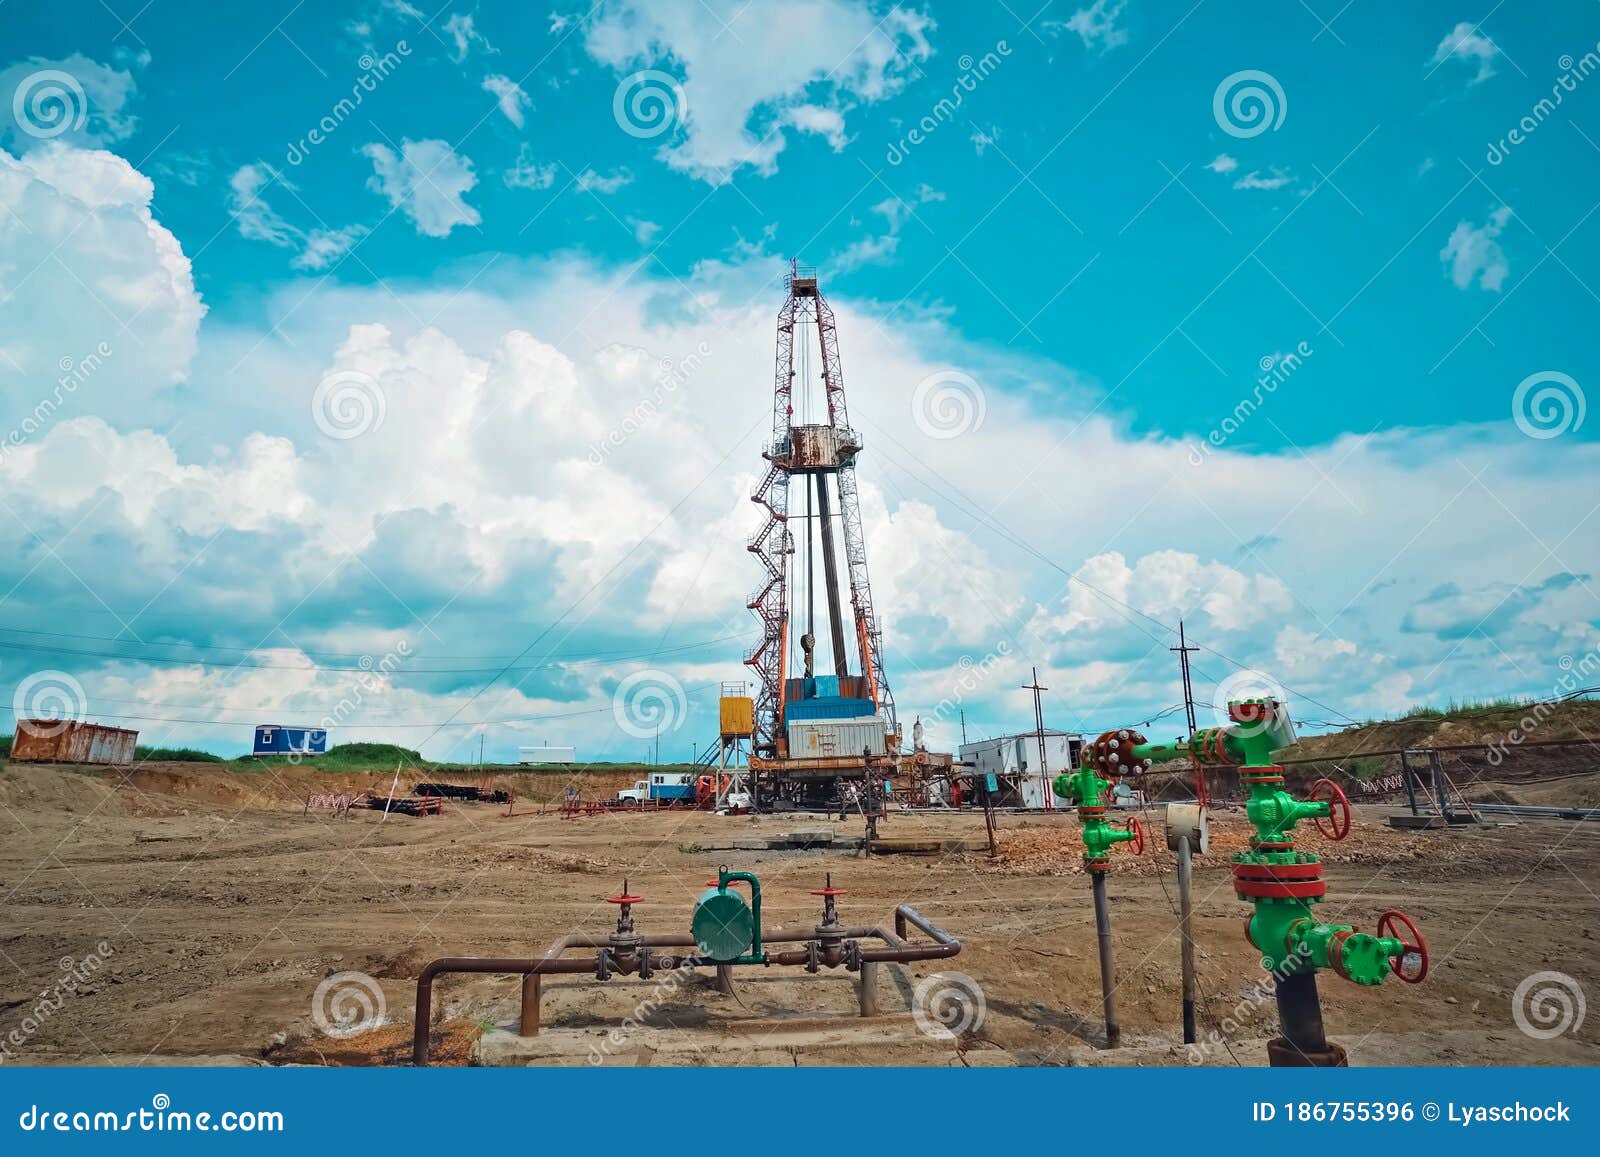 Drilling Rig for Oil Well Drilling. Equipment for Drilling Oil and Gas